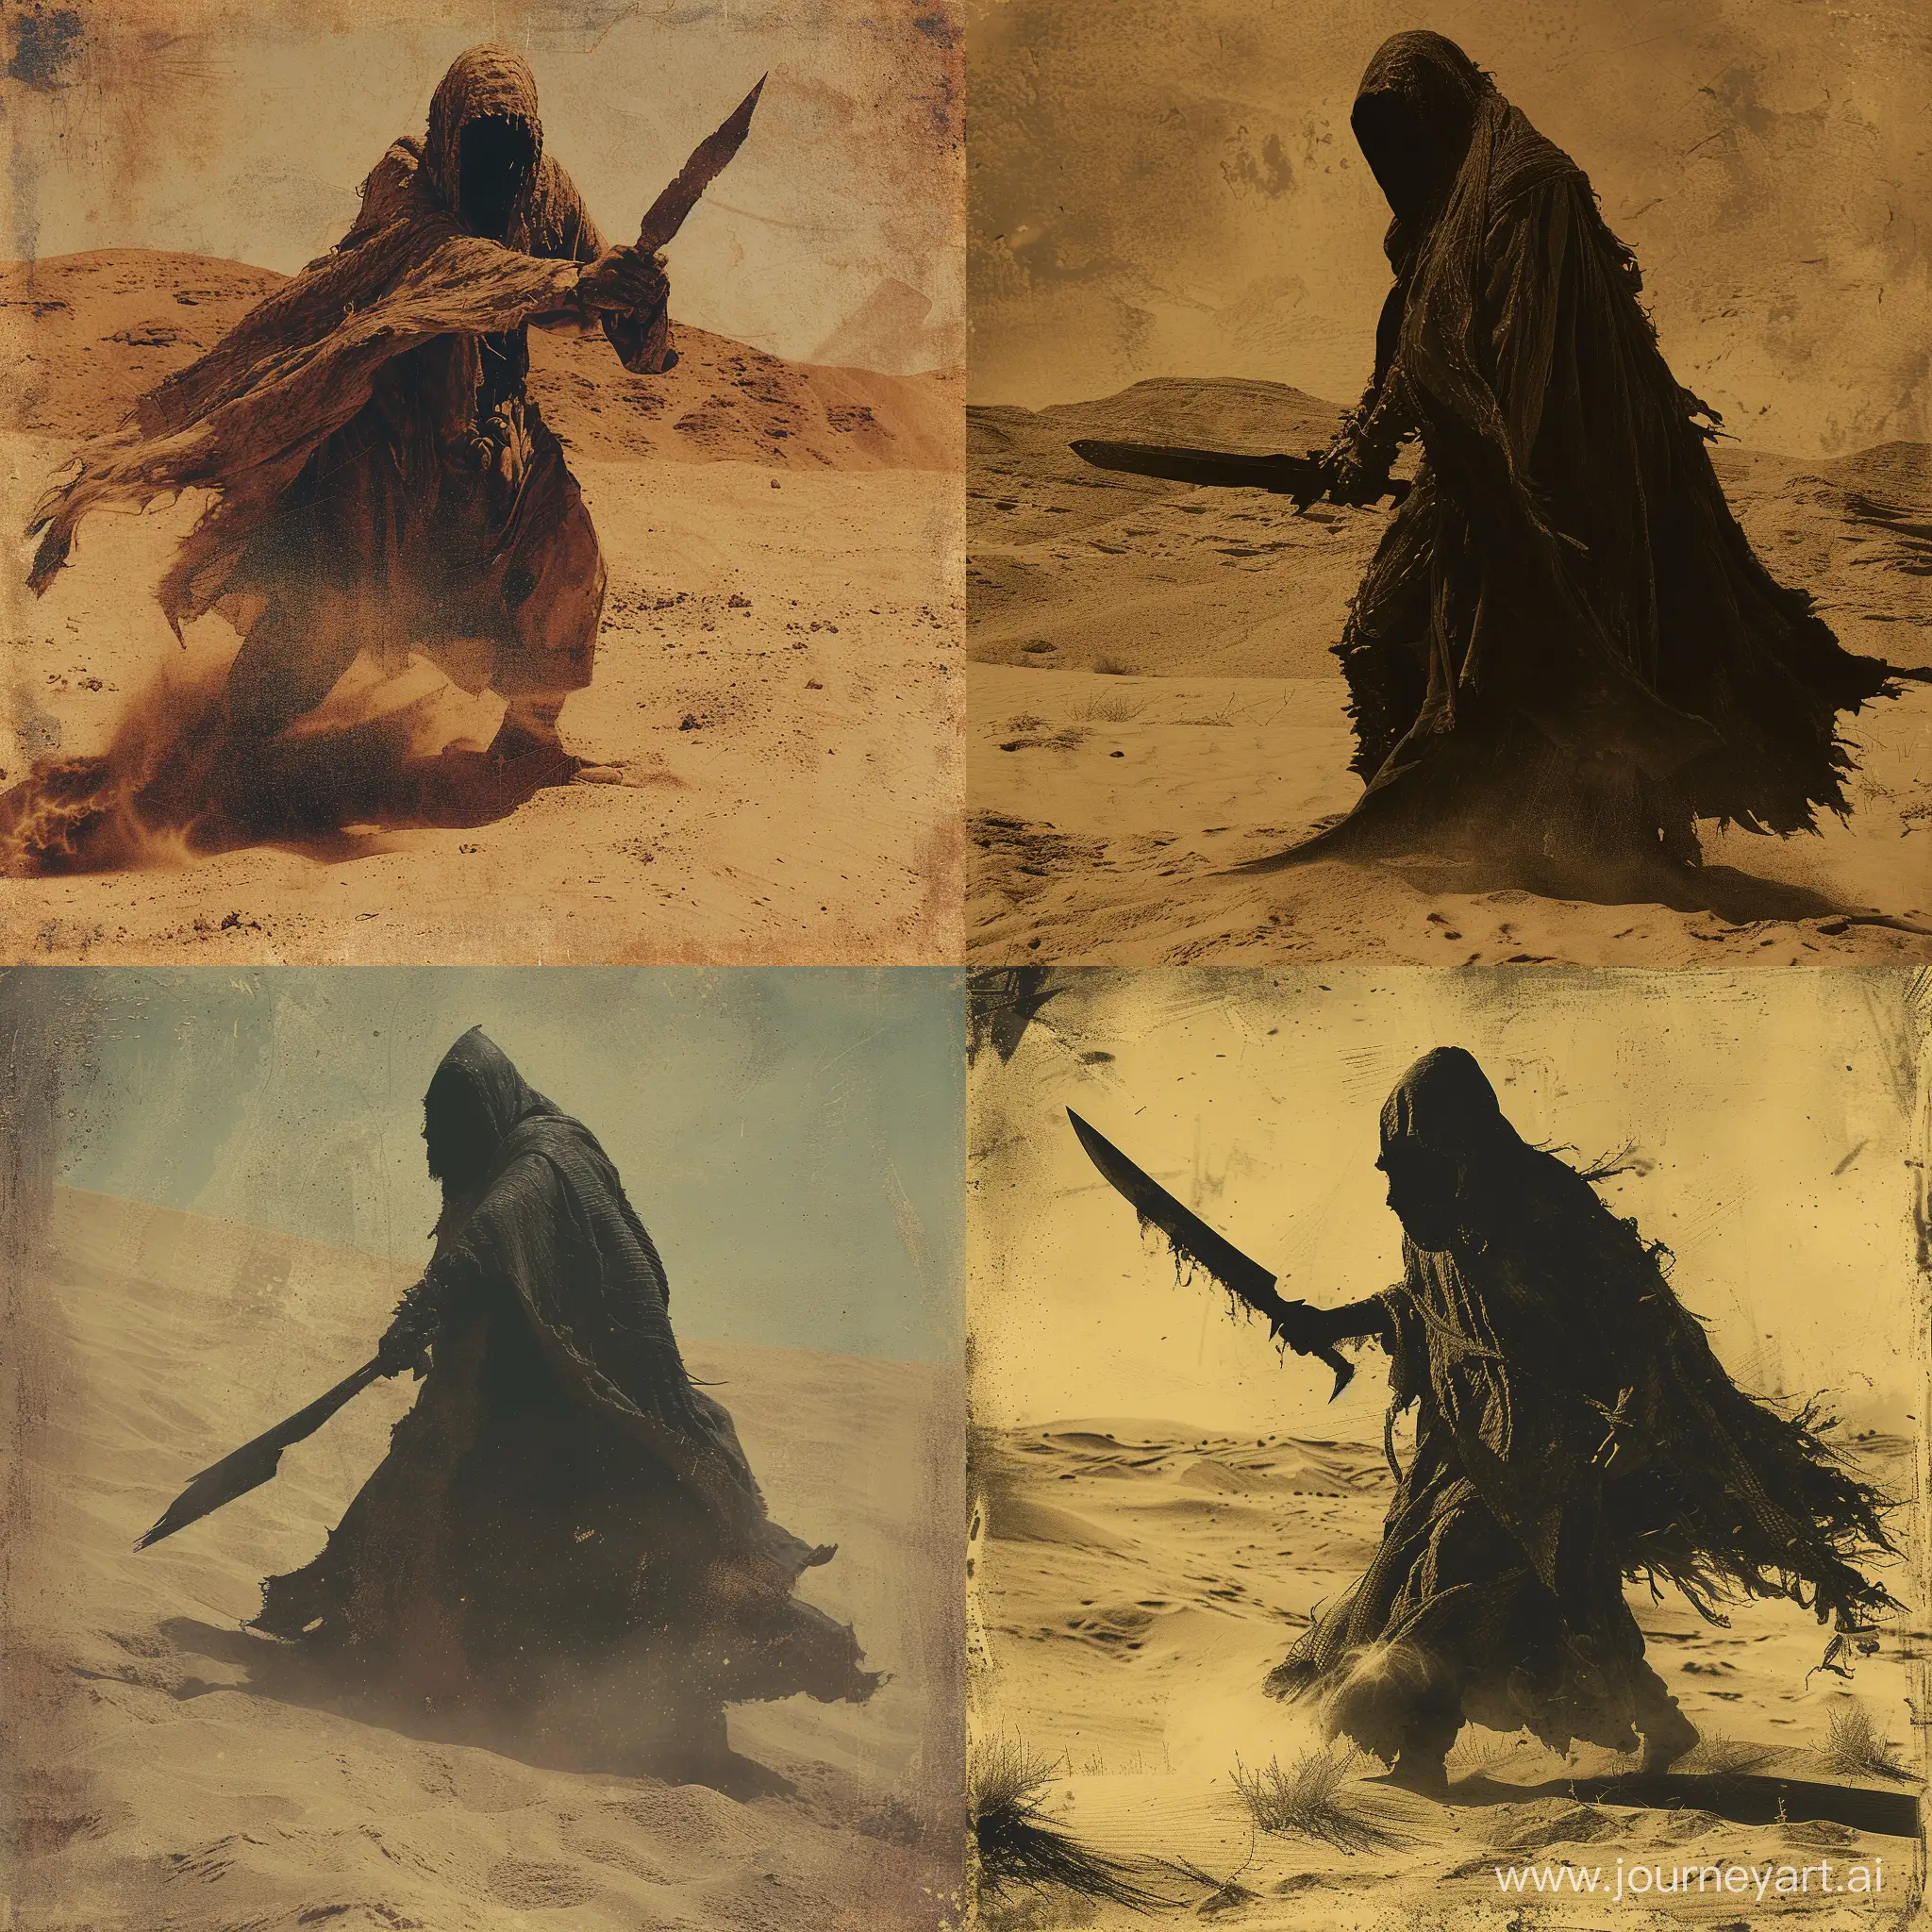 a dune Sinister desert nomad, Cloak woven from the cursed hides of ancient sandworms, Wields a crysknife, menacing,  in a middle of a desert ,1970's dark fantasy style, gritty, dark, vintage, detailed